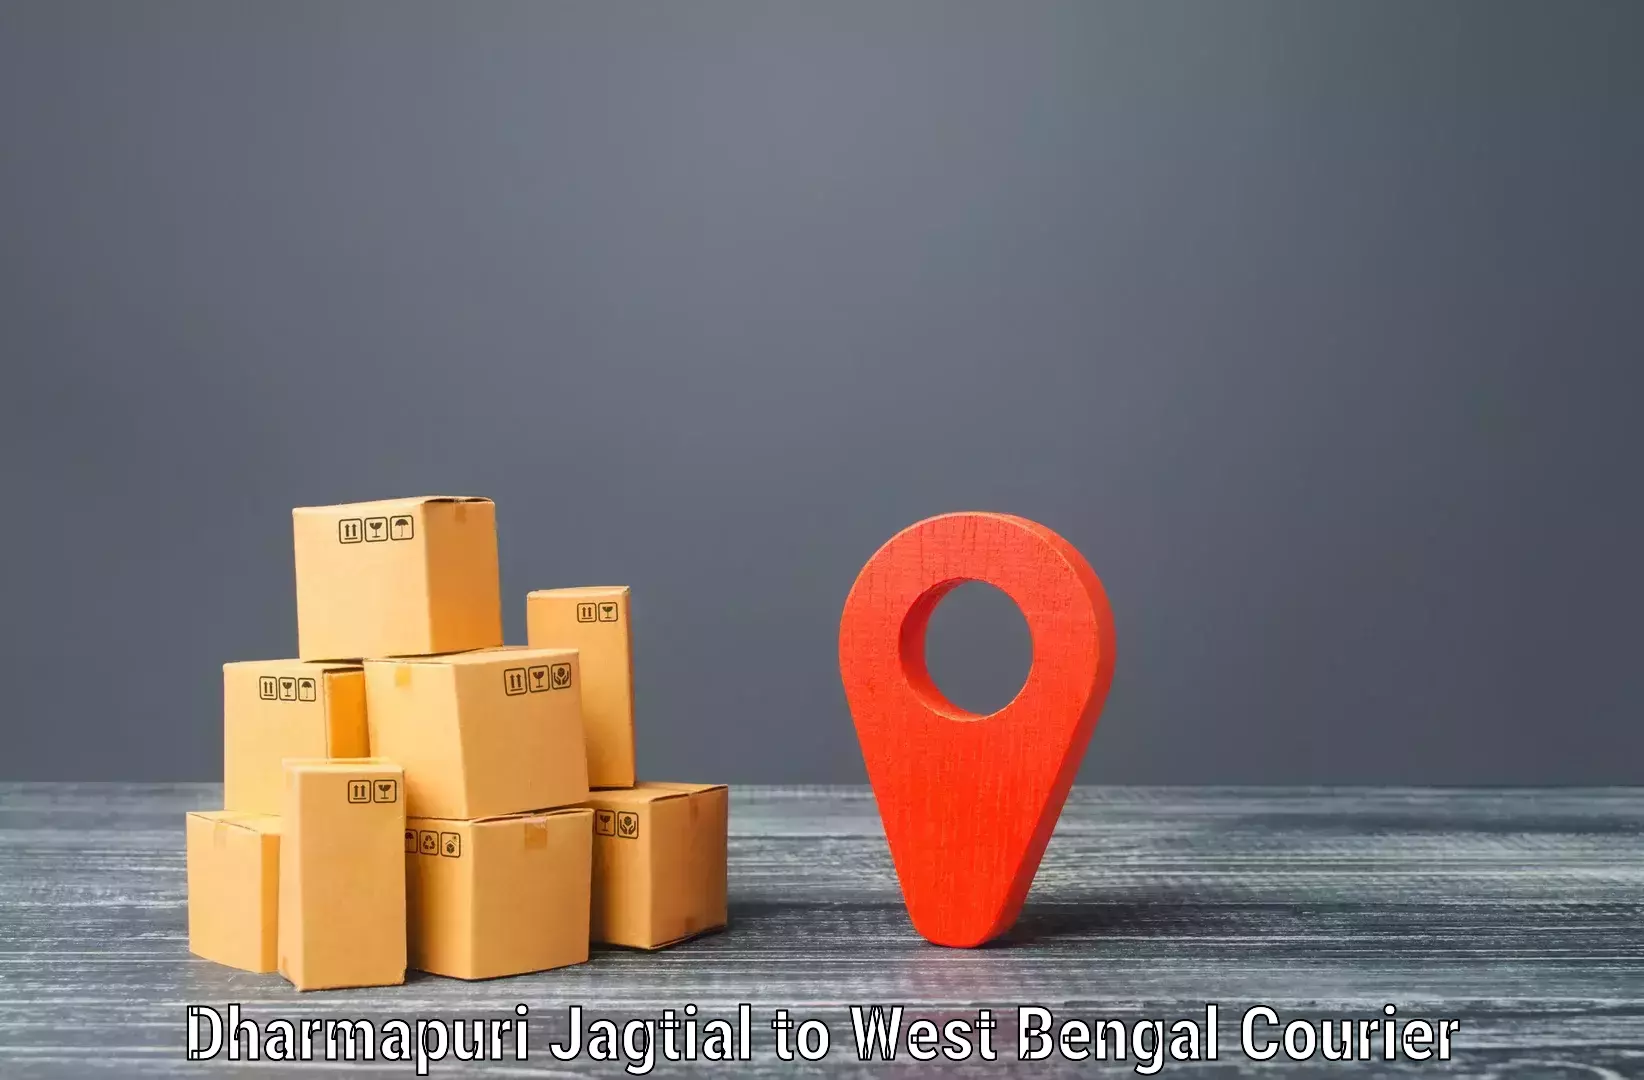 Business courier solutions Dharmapuri Jagtial to West Bengal